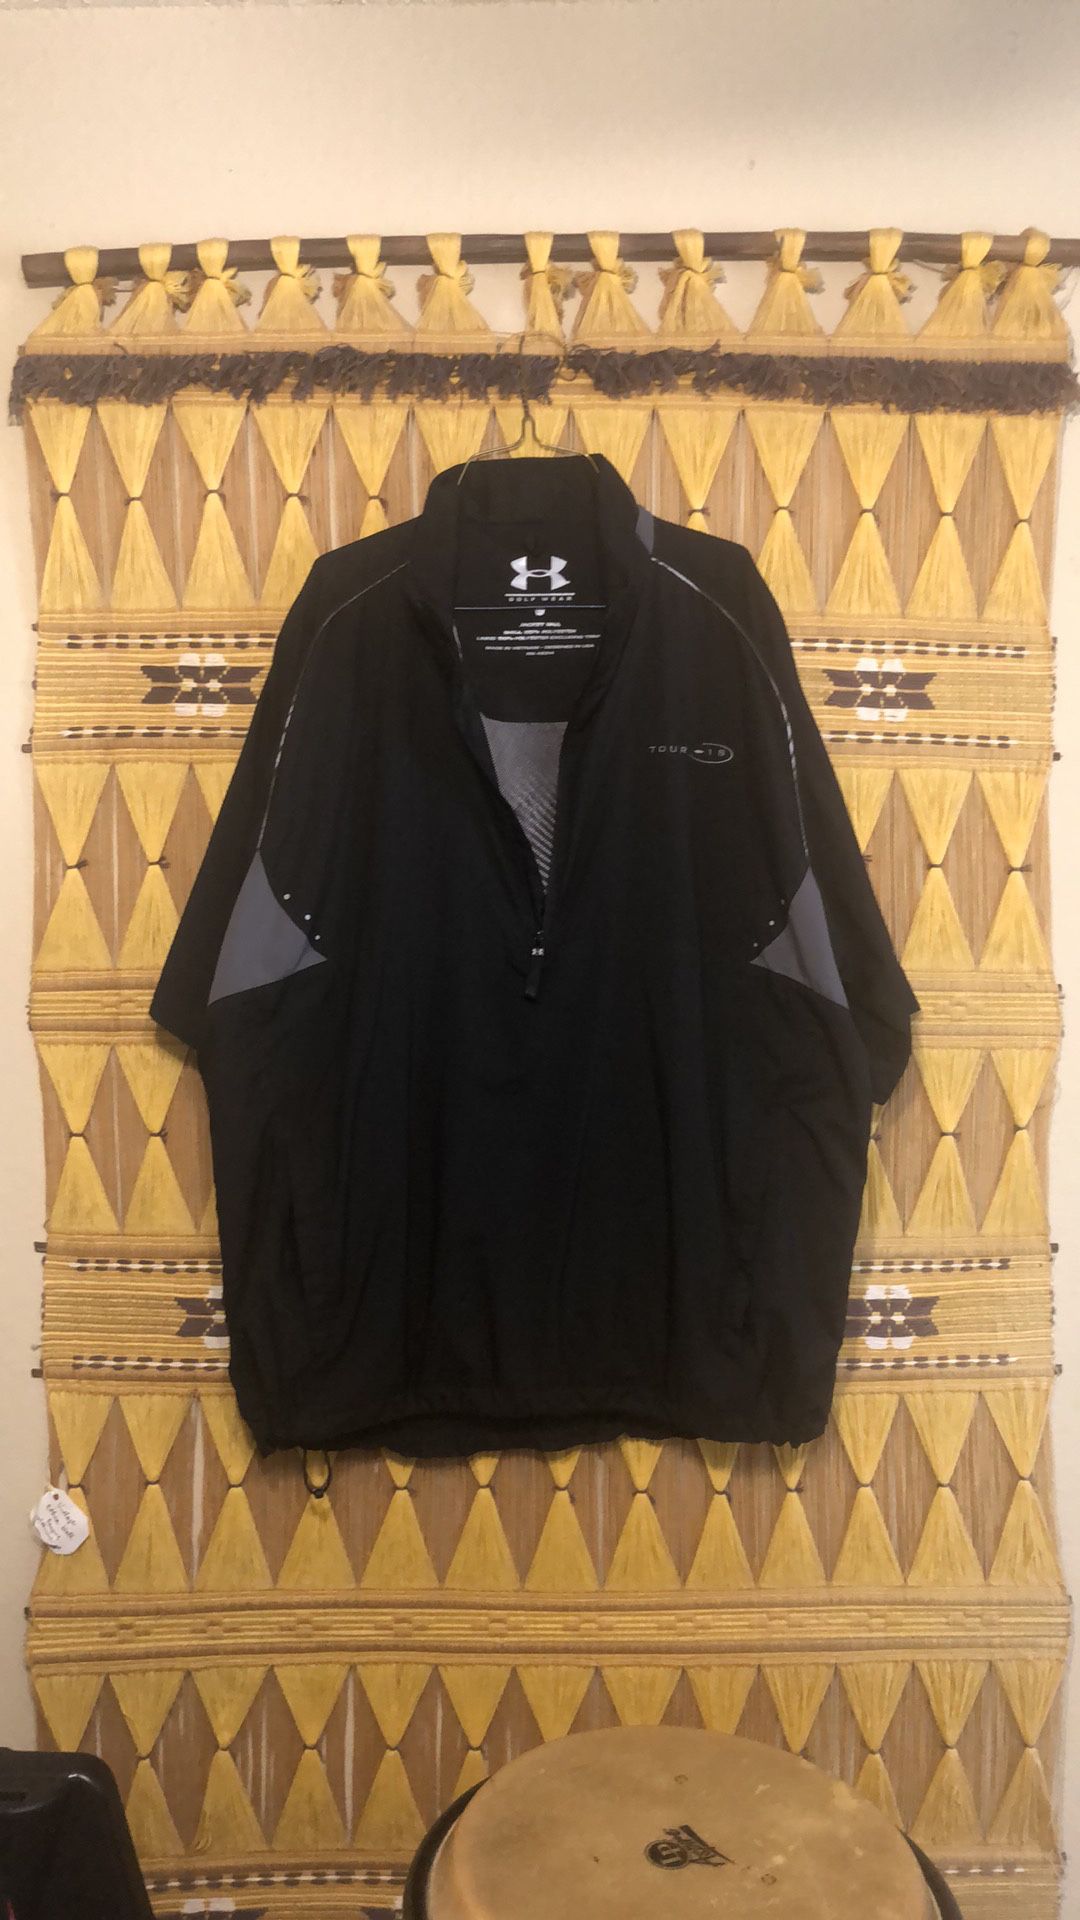 Large Under Armour Performance Golf Wear Short Sleeve Jacket Size Men's Black used in great condition. Your 18 2018 edition black with gray accents. H